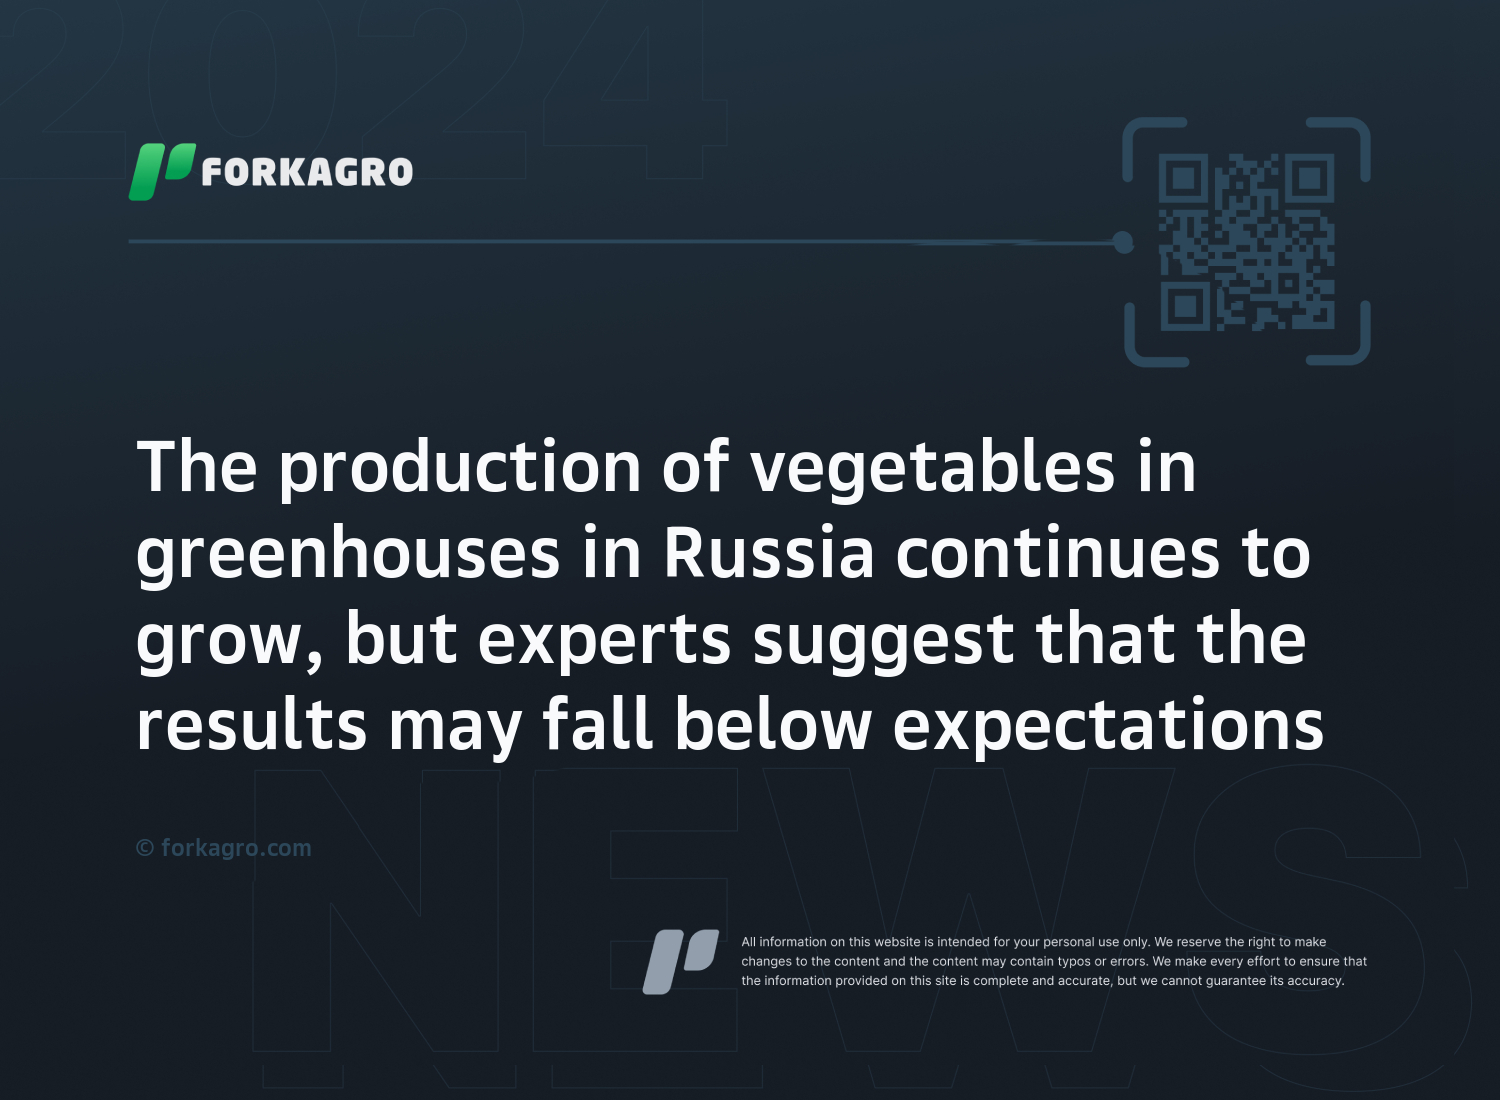 The production of vegetables in greenhouses in Russia continues to grow, but experts suggest that the results may fall below expectations